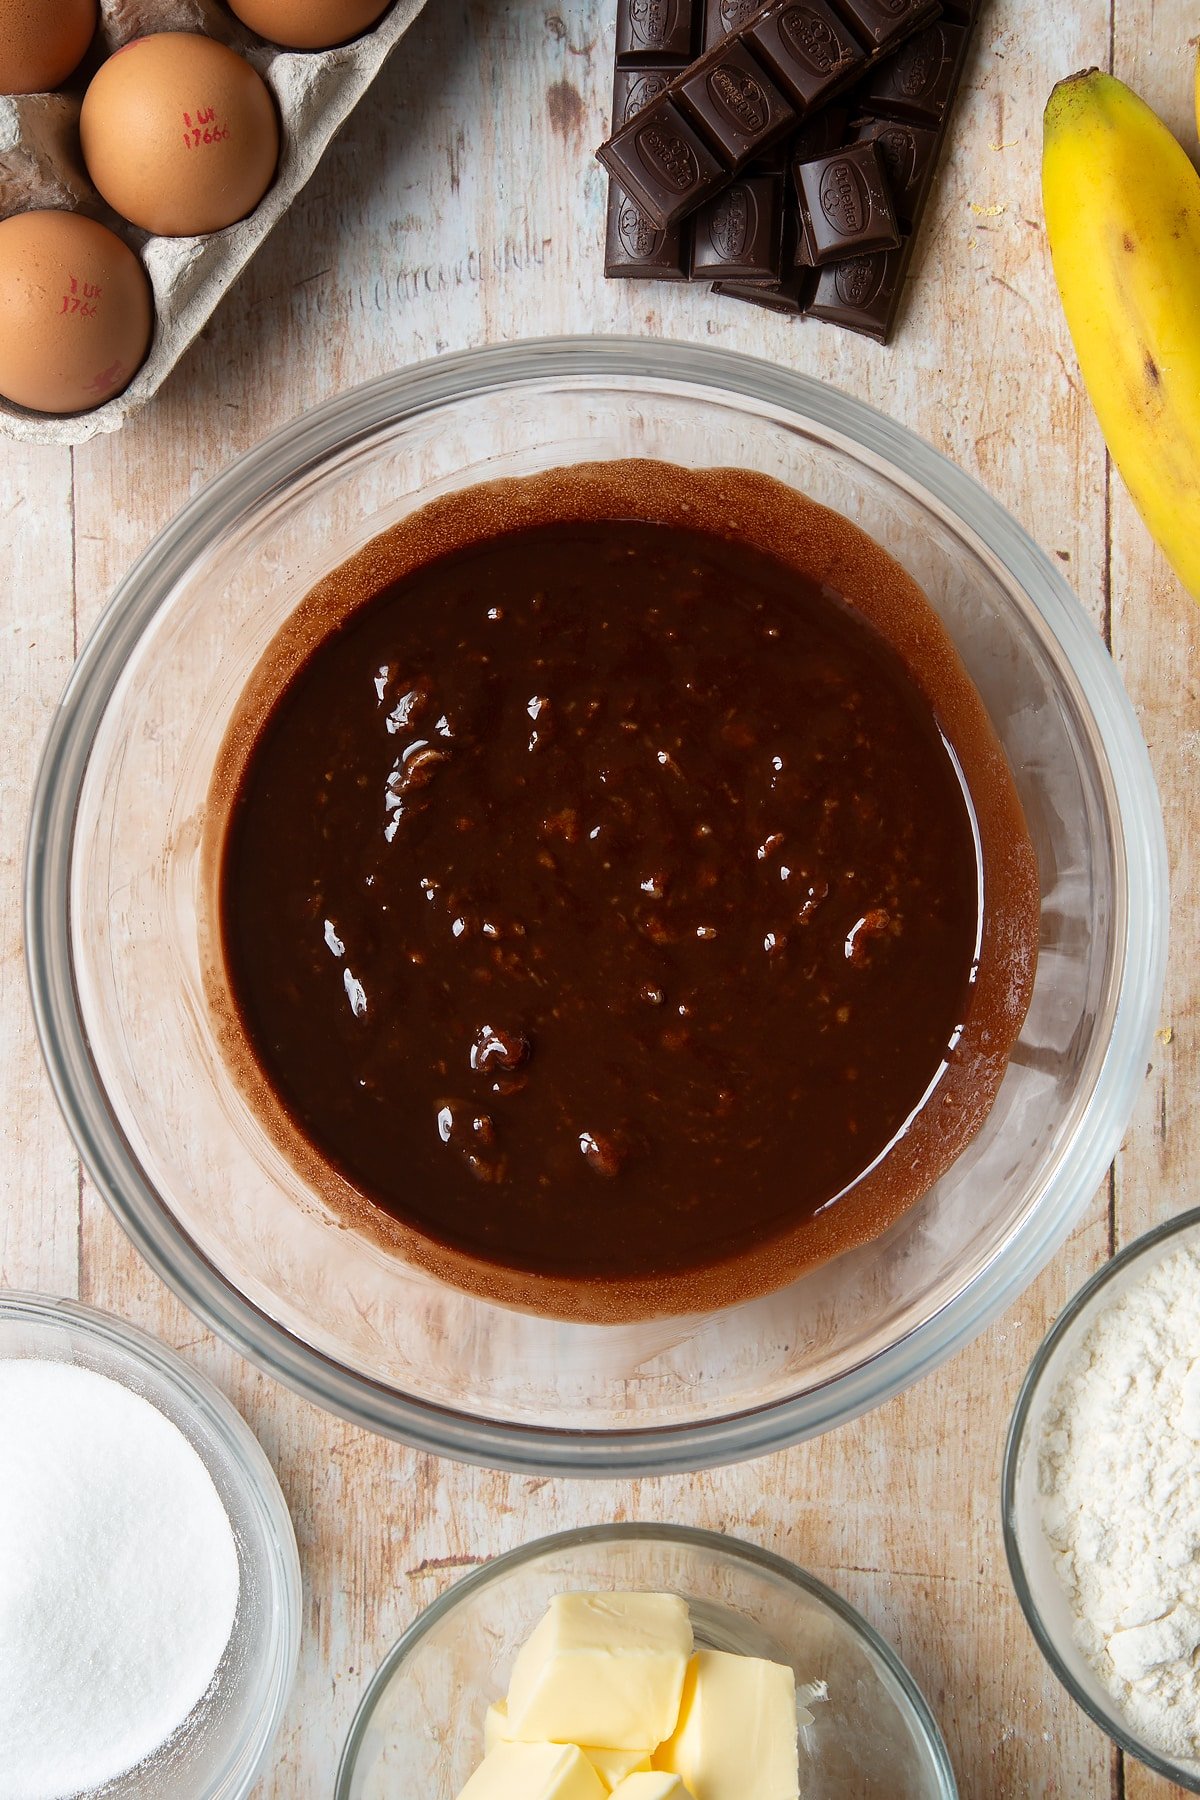 Overhead shot of chocolate liquid mixed with mashed bananas in a large clear bowl